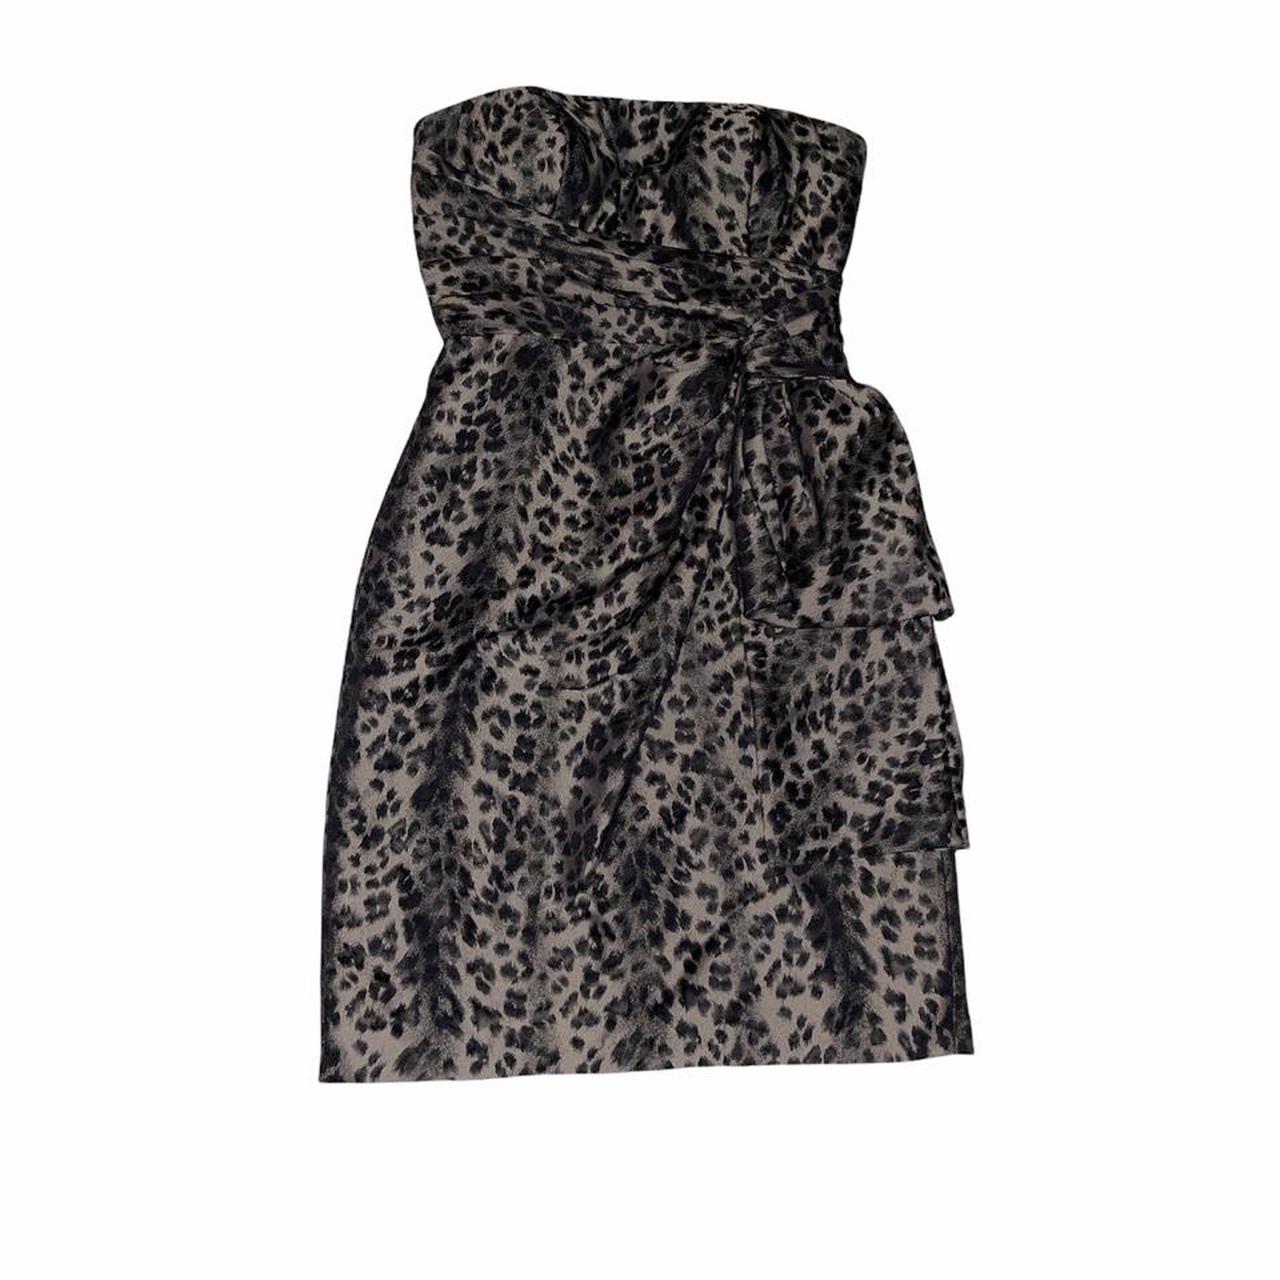 Product Image 1 - Maggy London strapless dress. Good